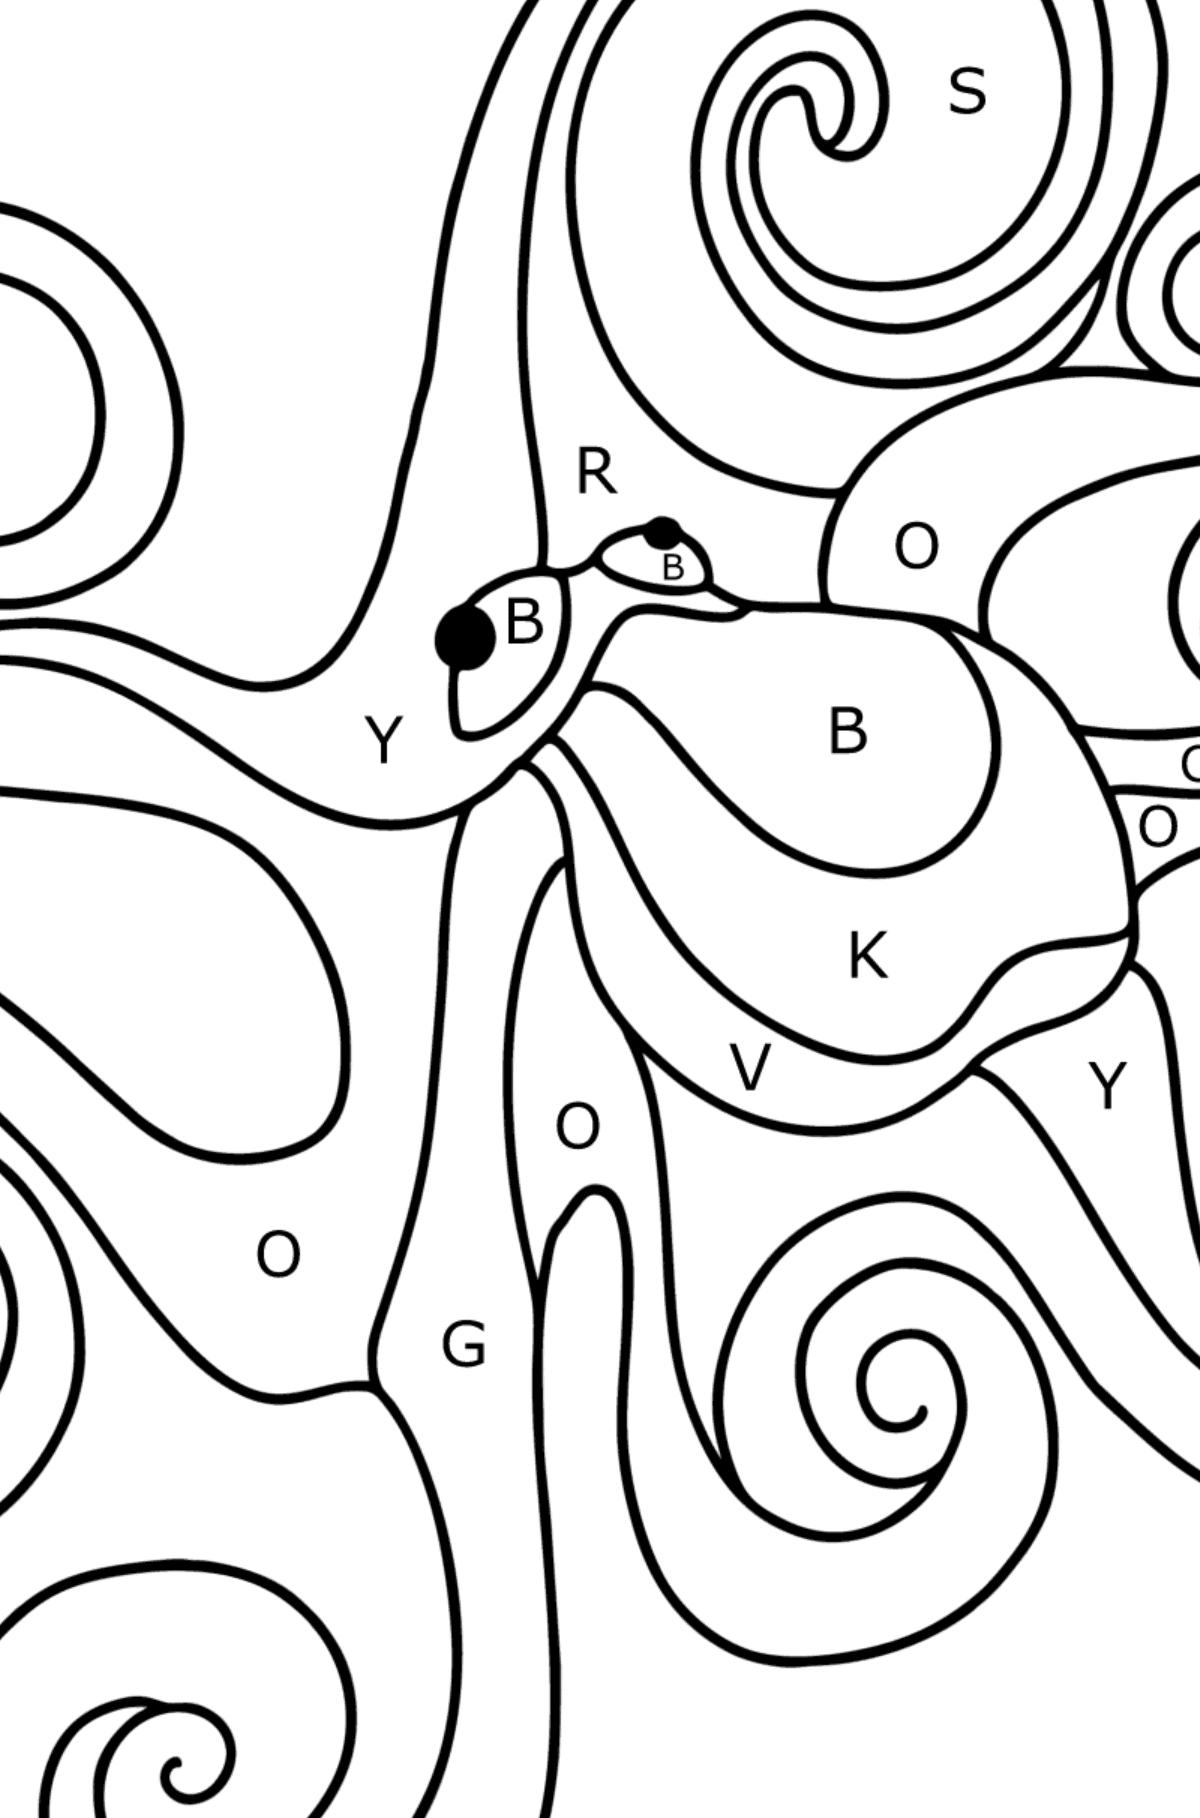 Common octopus coloring page - Coloring by Letters for Kids